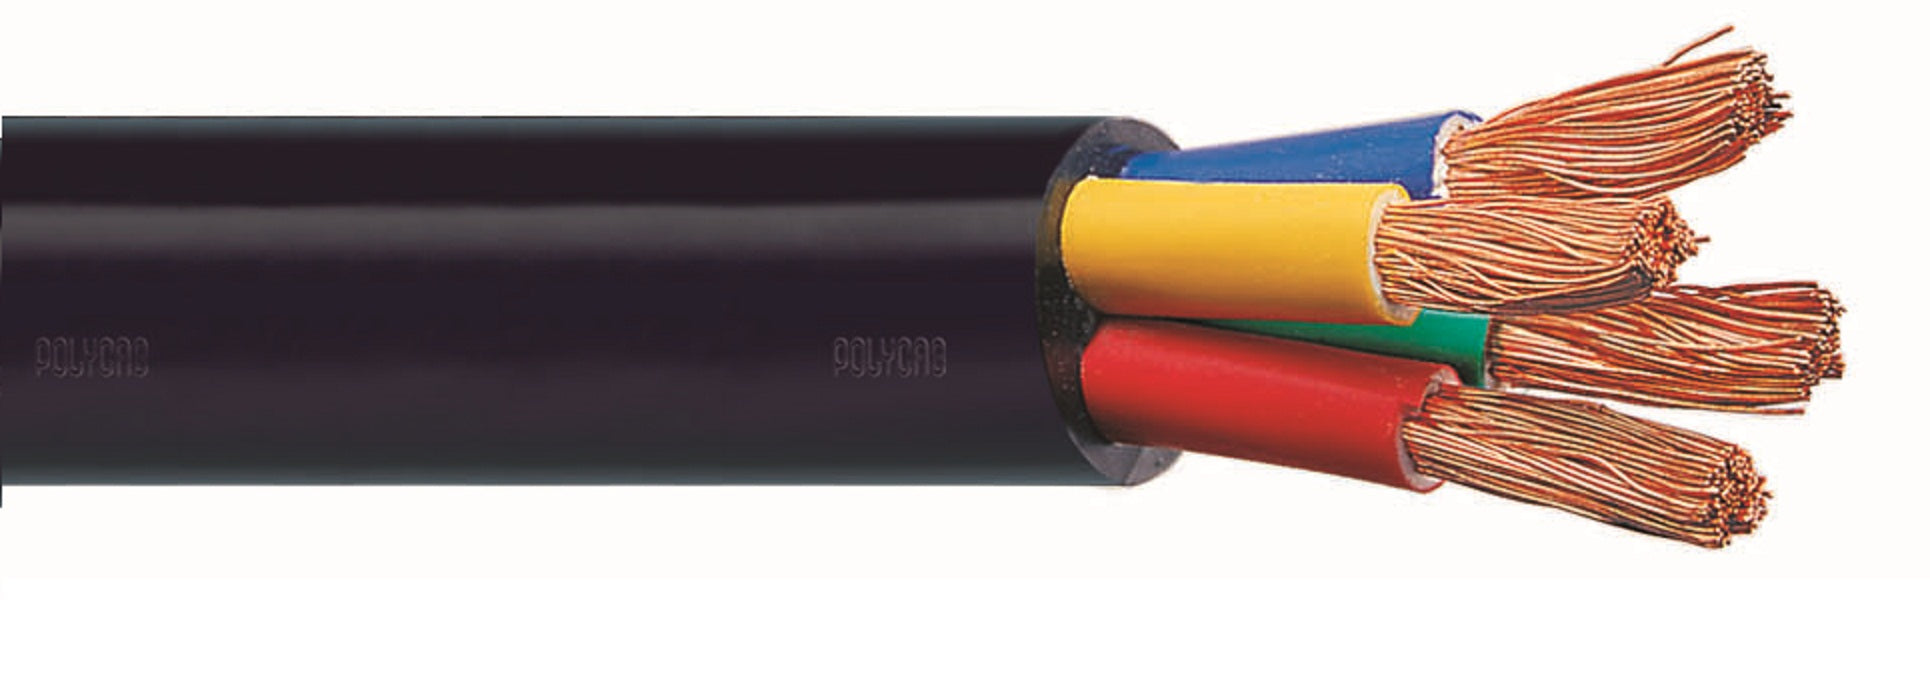 Polycab 10 Sqmm 4 core Black Copper Flexible InsFrls Cable (100 Meters)